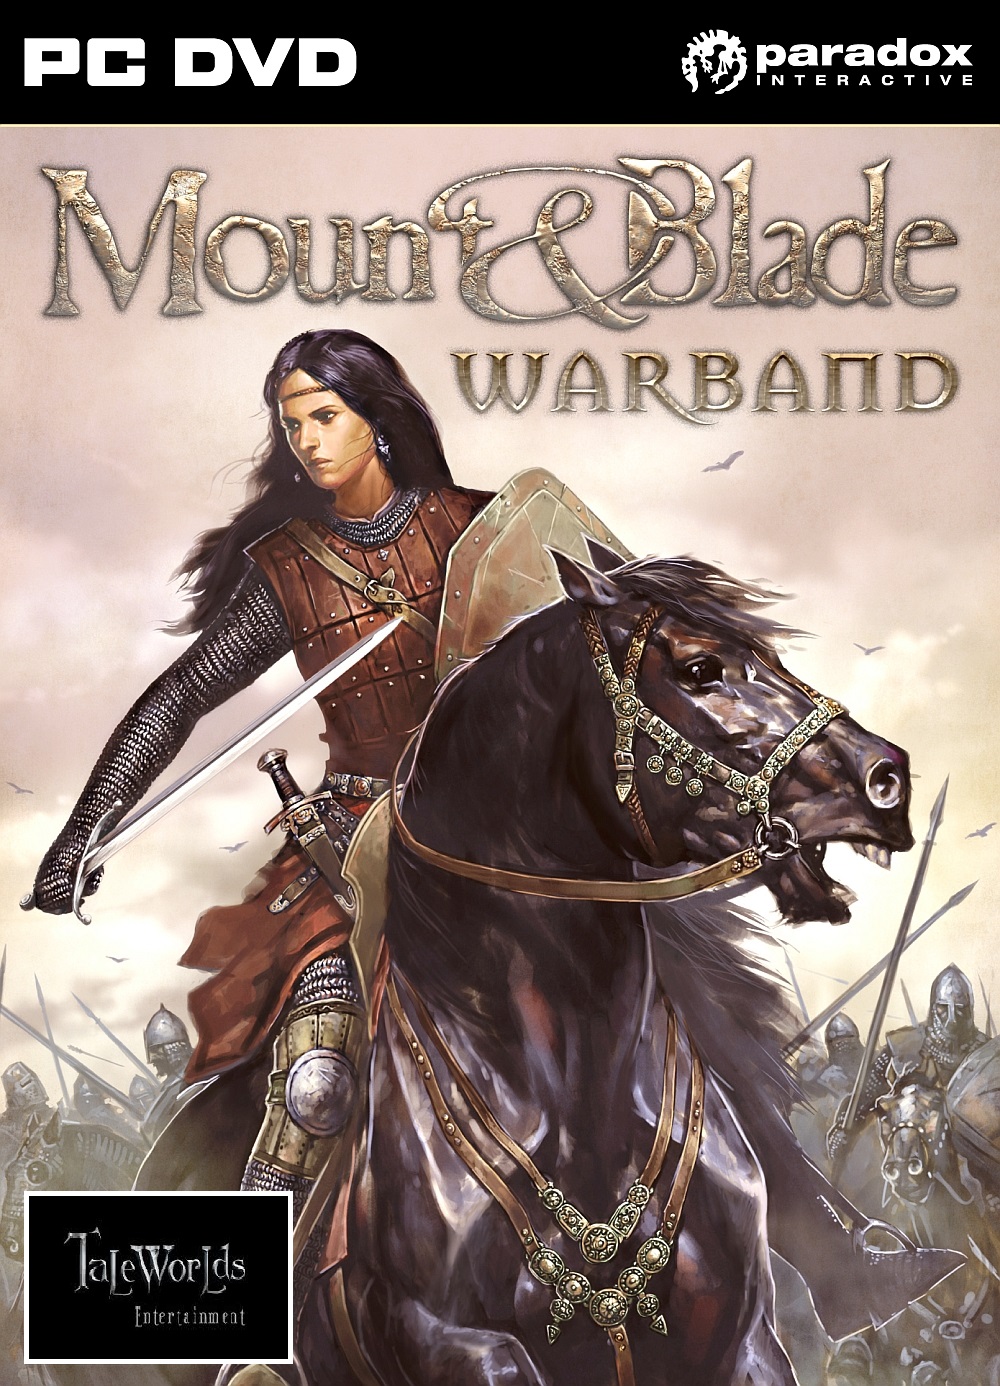 mount and blade heroes